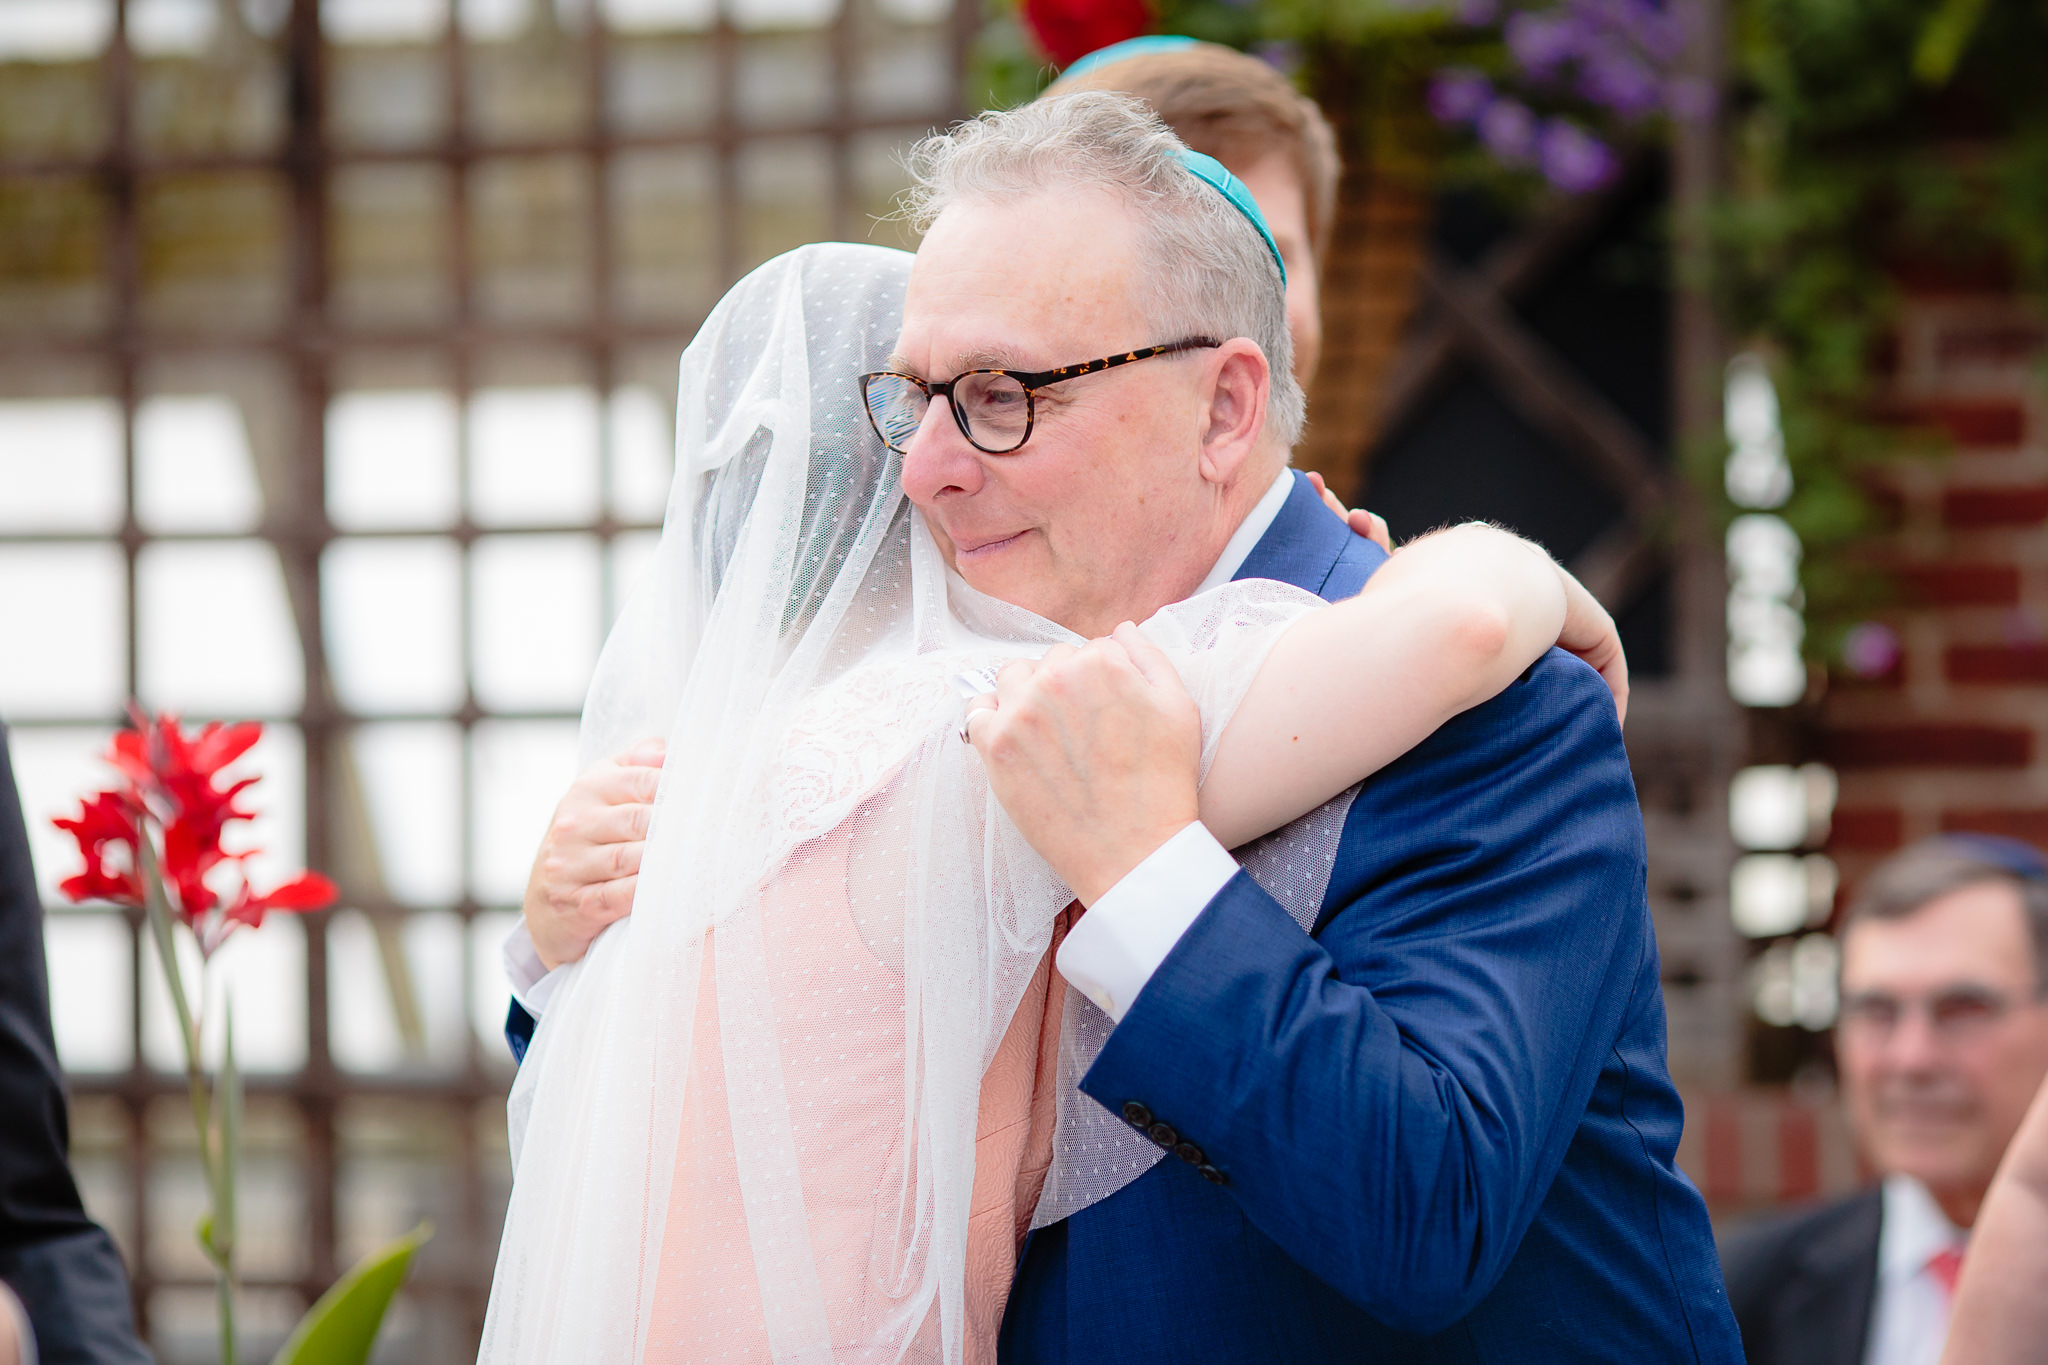 Father of the bride hugs his daughter after the Ketubah signing at Phipps Conservatory